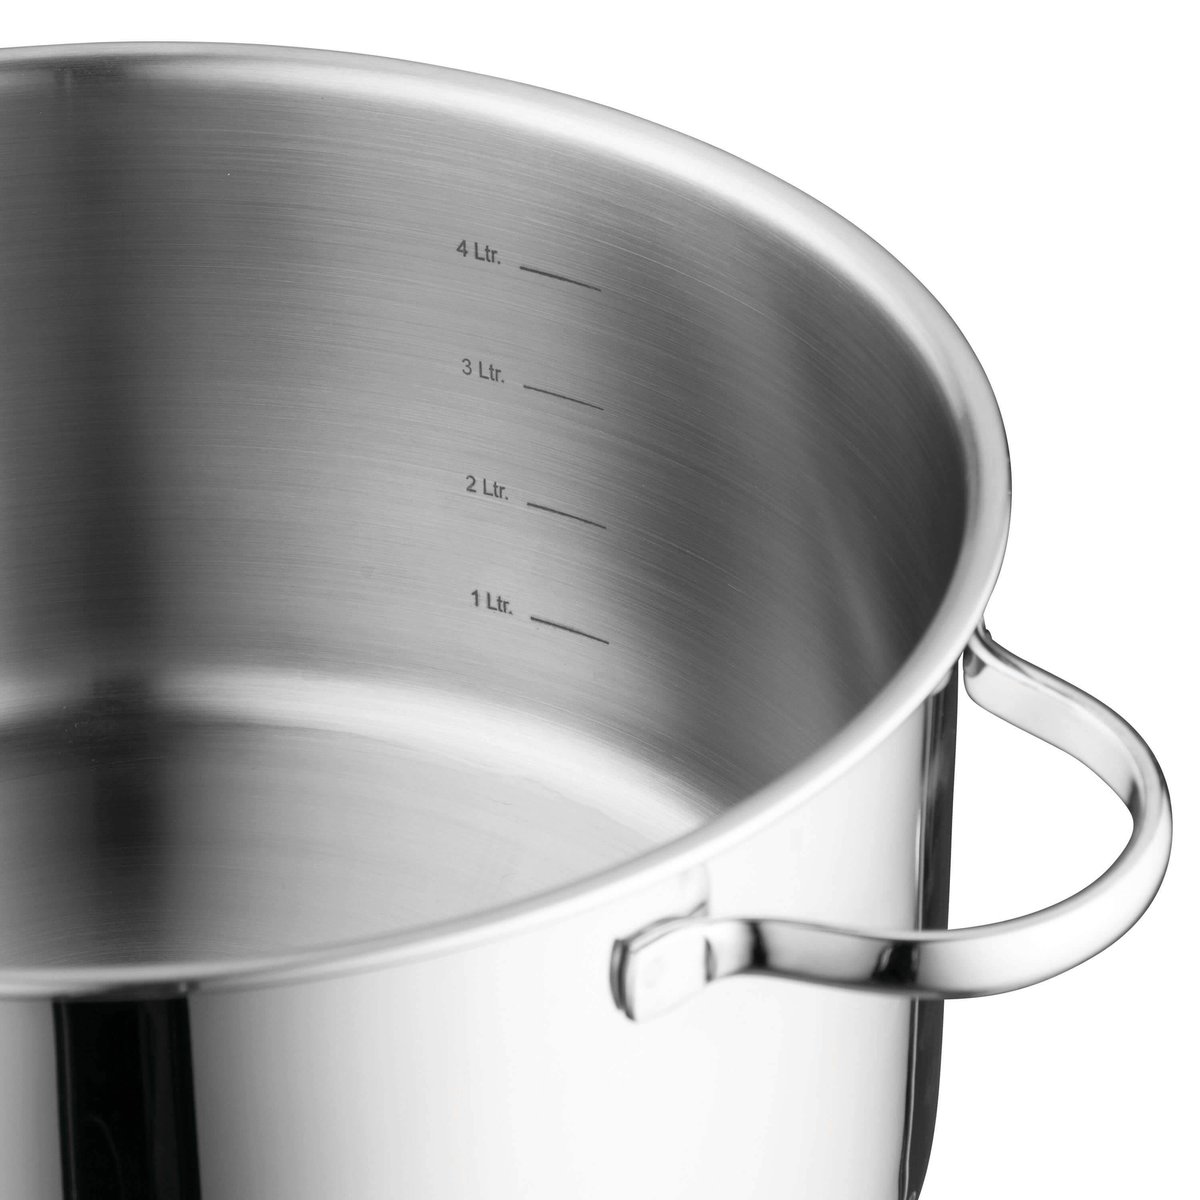 https://images.verishop.com/berghoff-berghoff-essentials-comfort-12pc-18-10-stainless-steel-cookware-set-with-glass-lids/M05413821083636-2109639133?auto=format&cs=strip&fit=max&w=1200